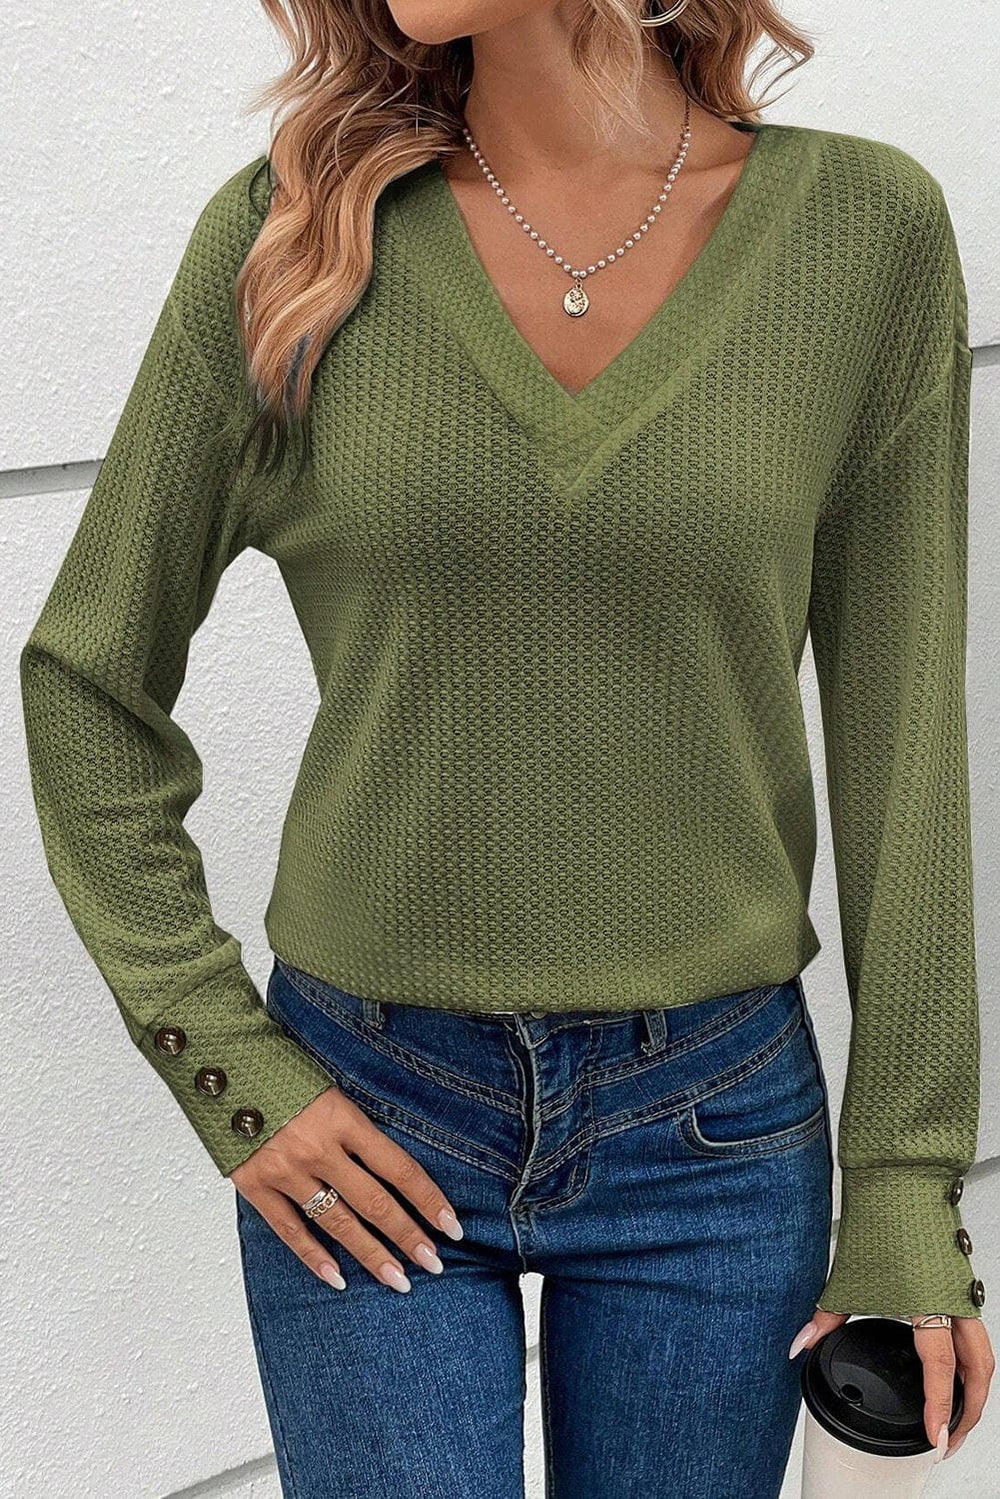 The802Gypsy  Tops Jungle Green / S / 70%Polyester+27%Viscose+3%Elastane TRAVELING GYPSY-Long Sleeve Top